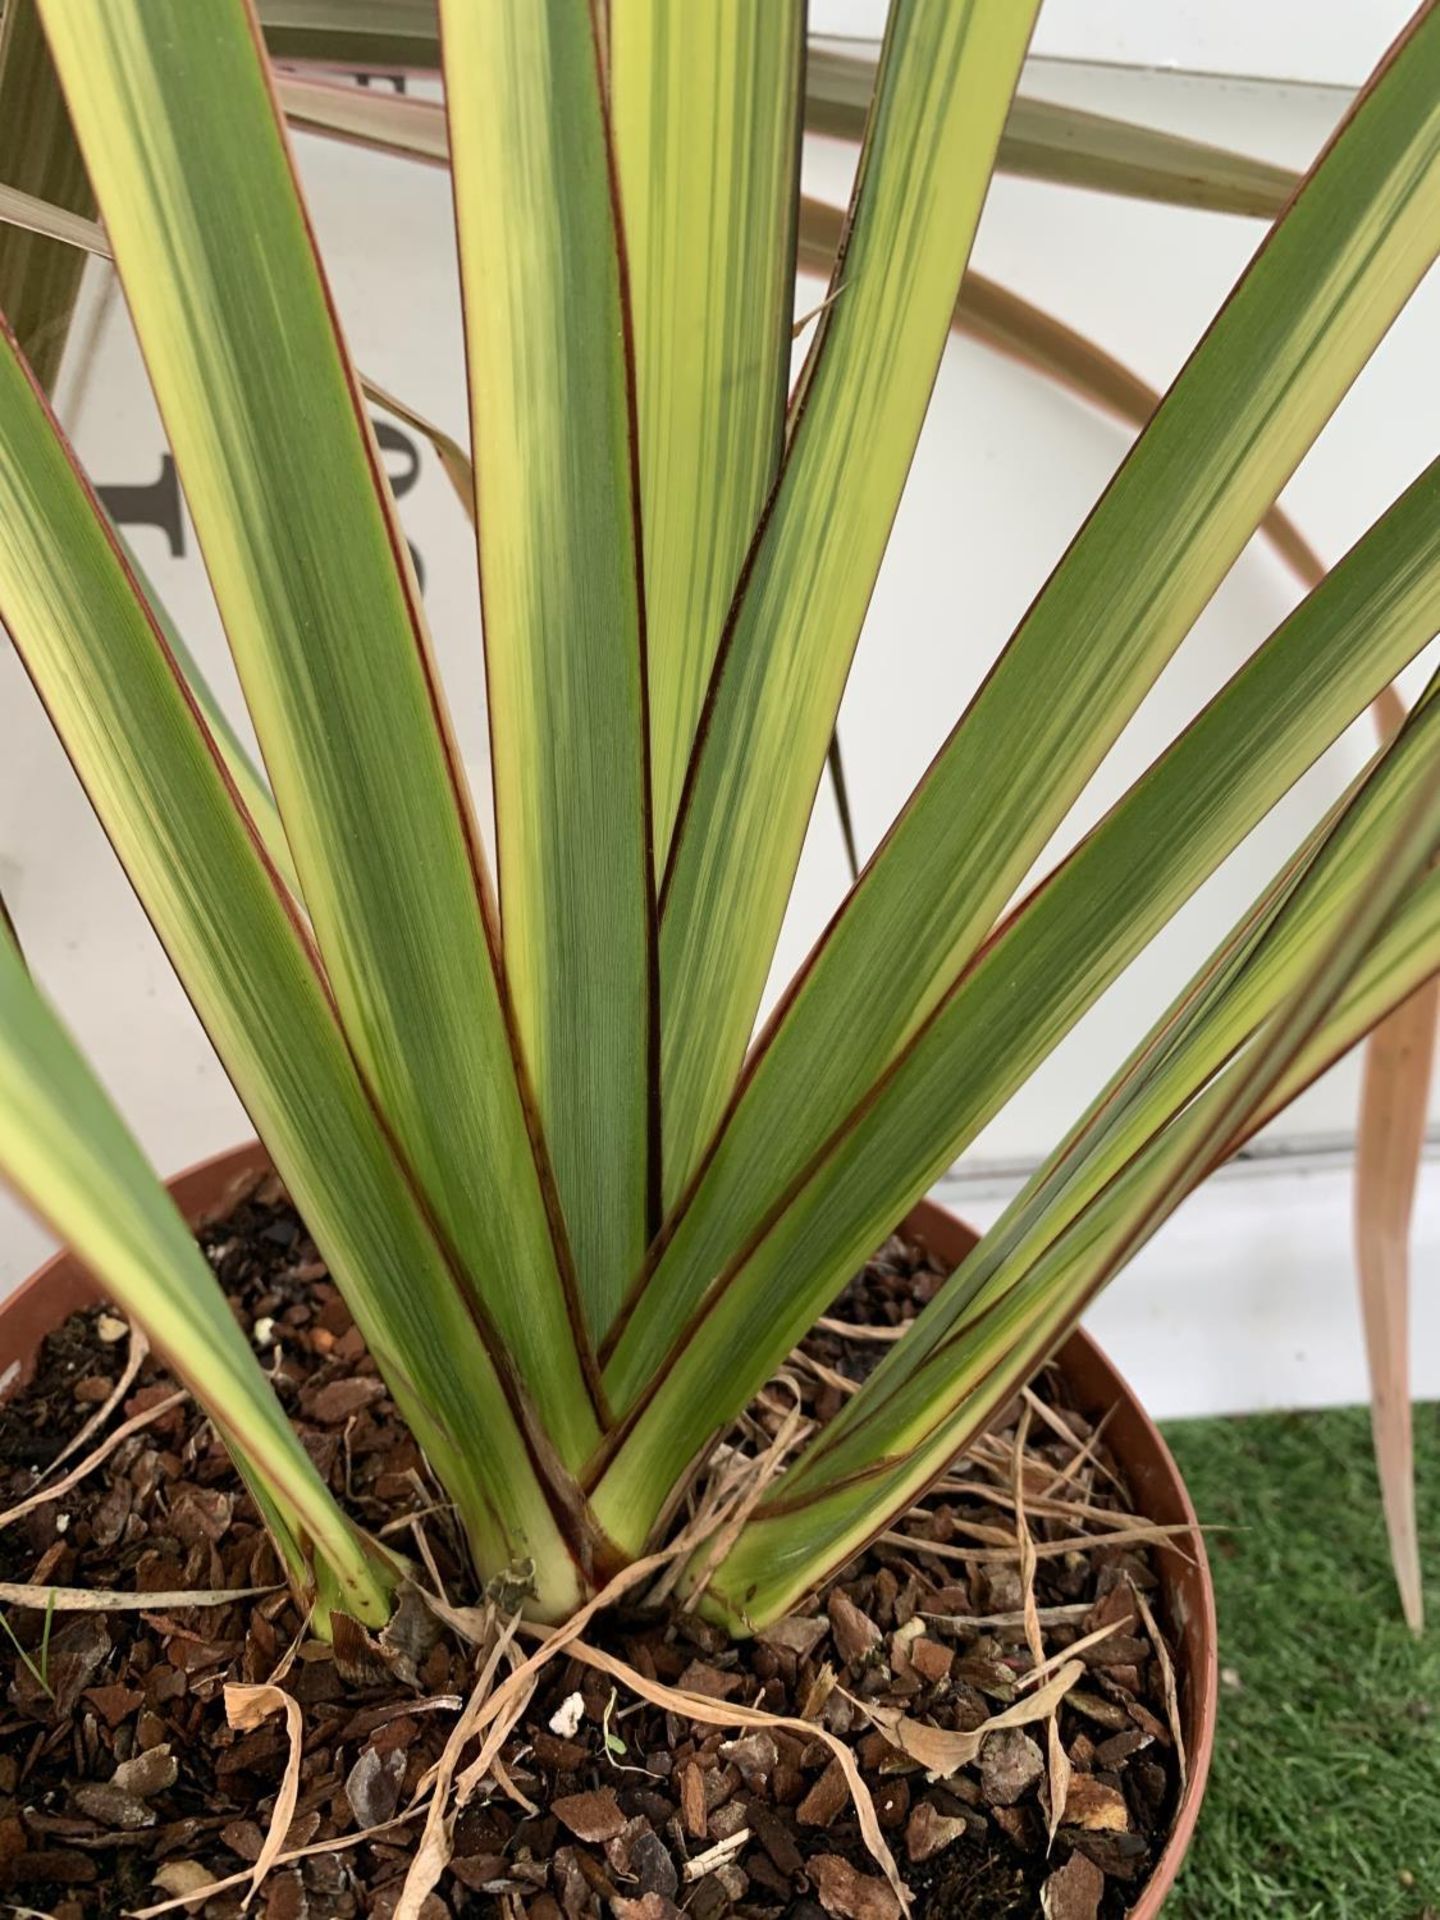 TWO PHORMIUM TENAX 'CREAM DELIGHT' AND 'PINK STRIPE' IN 3 LTR POTS OVER 1 METRE IN HEIGHT PLUS VAT - Image 6 of 6